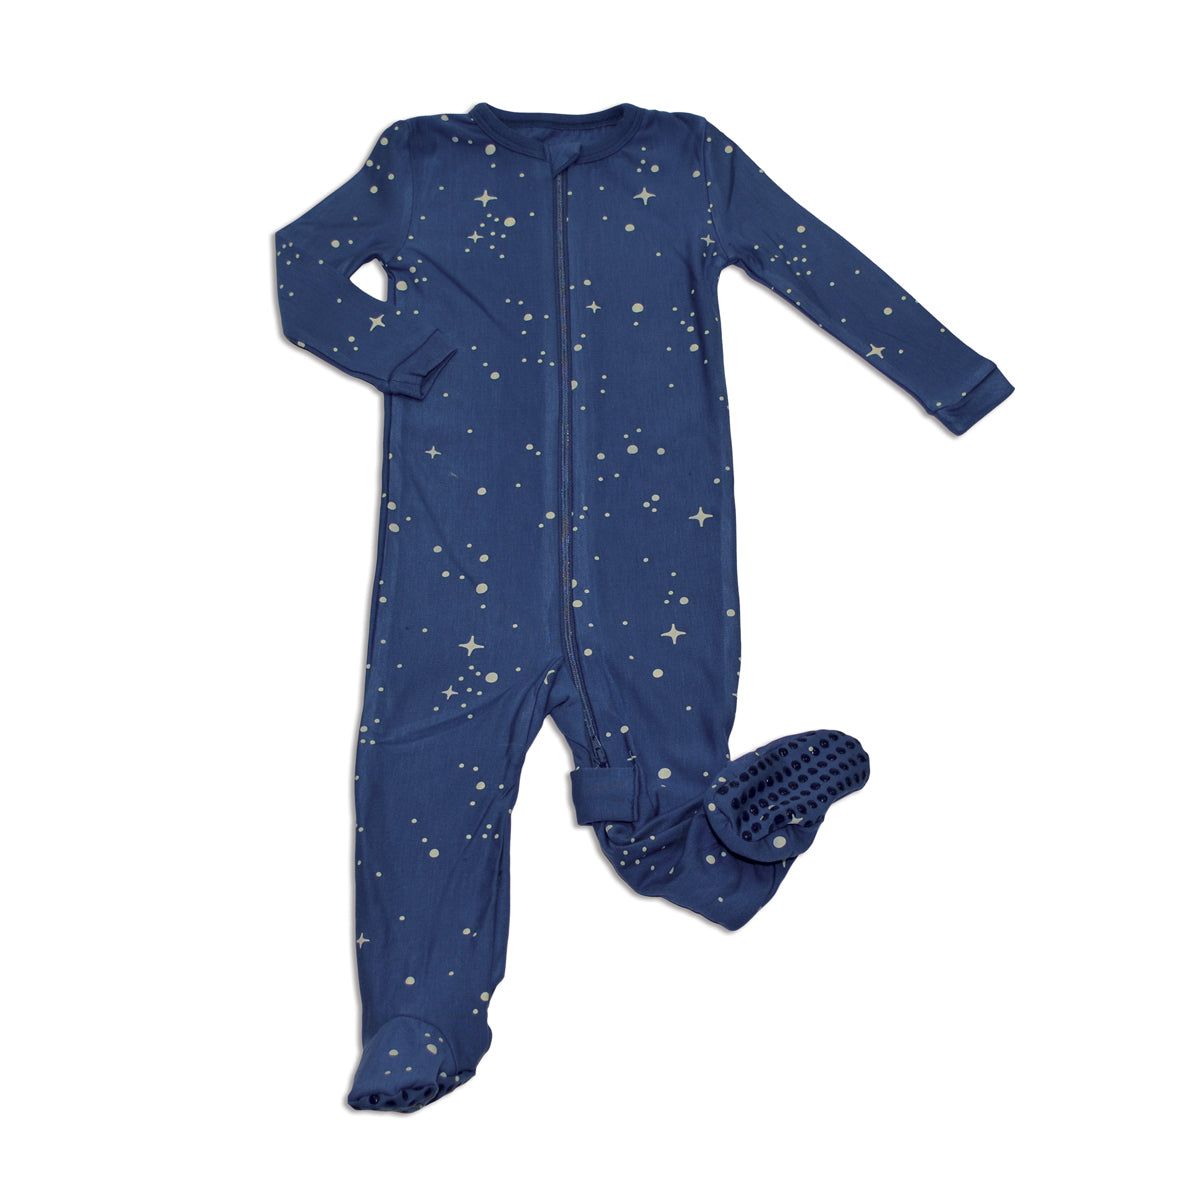 Silkberry Baby - Bamboo Zip-up Footies Wobbly Wave – thenestboutique